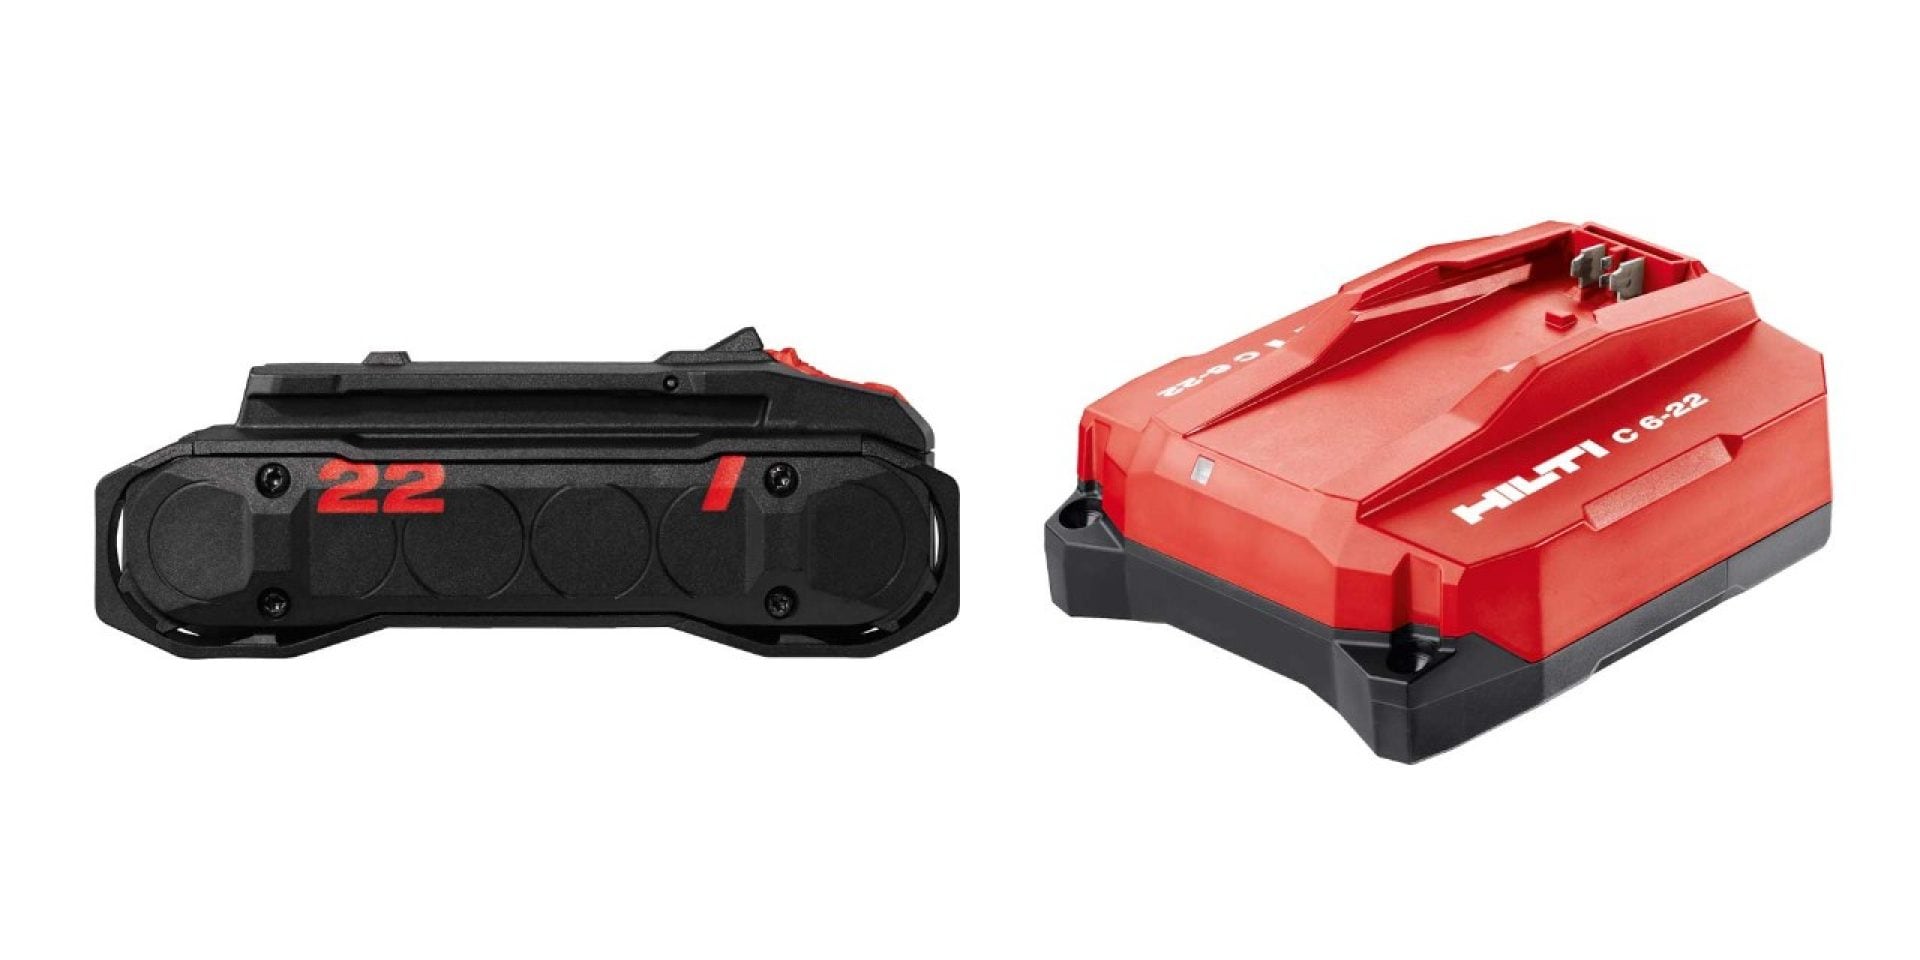 HILTI NURON BATTERY AND CHARGER